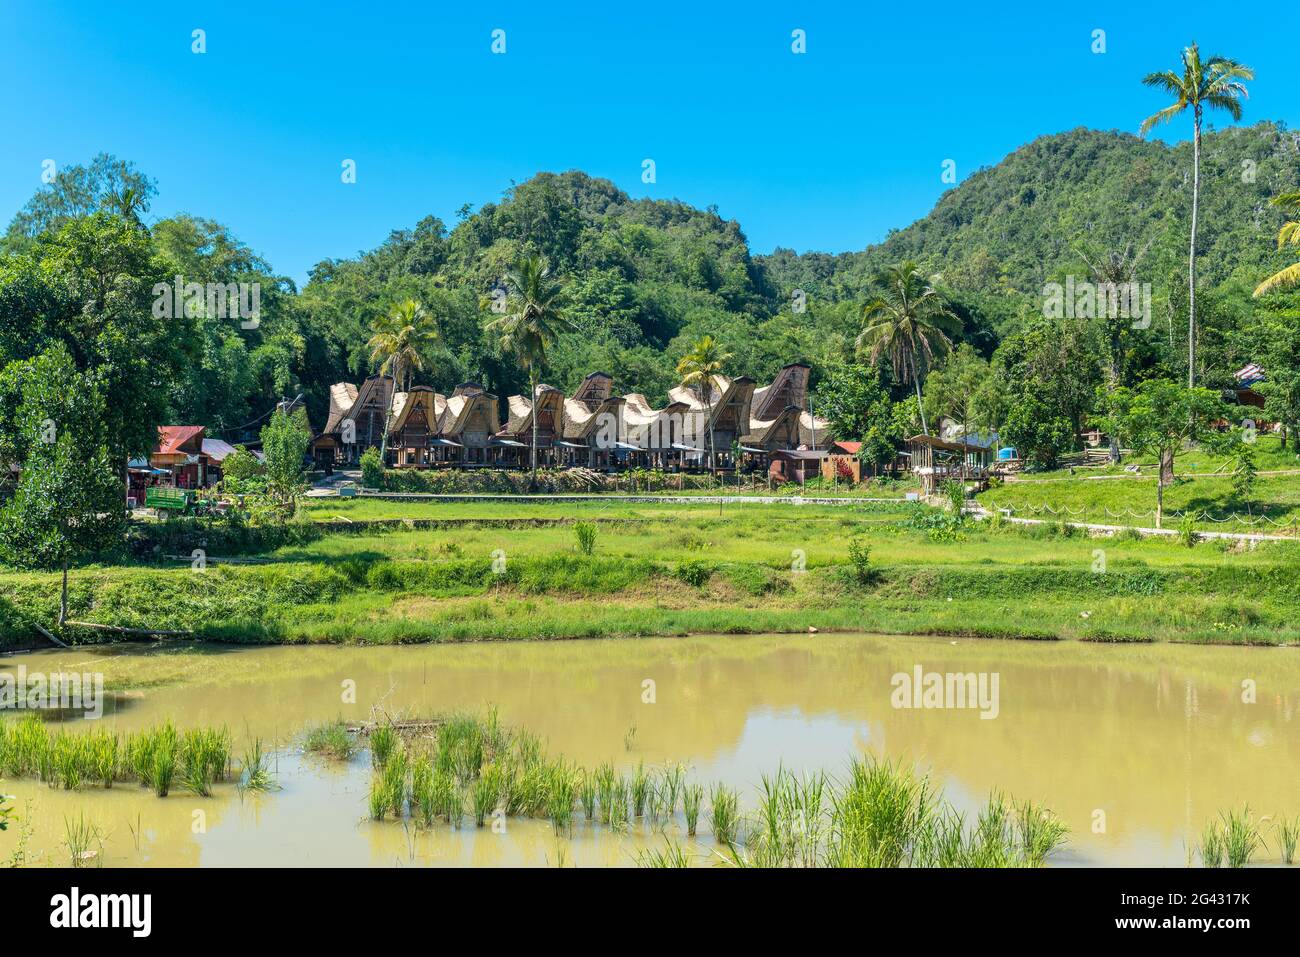 Kete Kesu is a village of Tana Toraja, known for its customs and traditional life Stock Photo